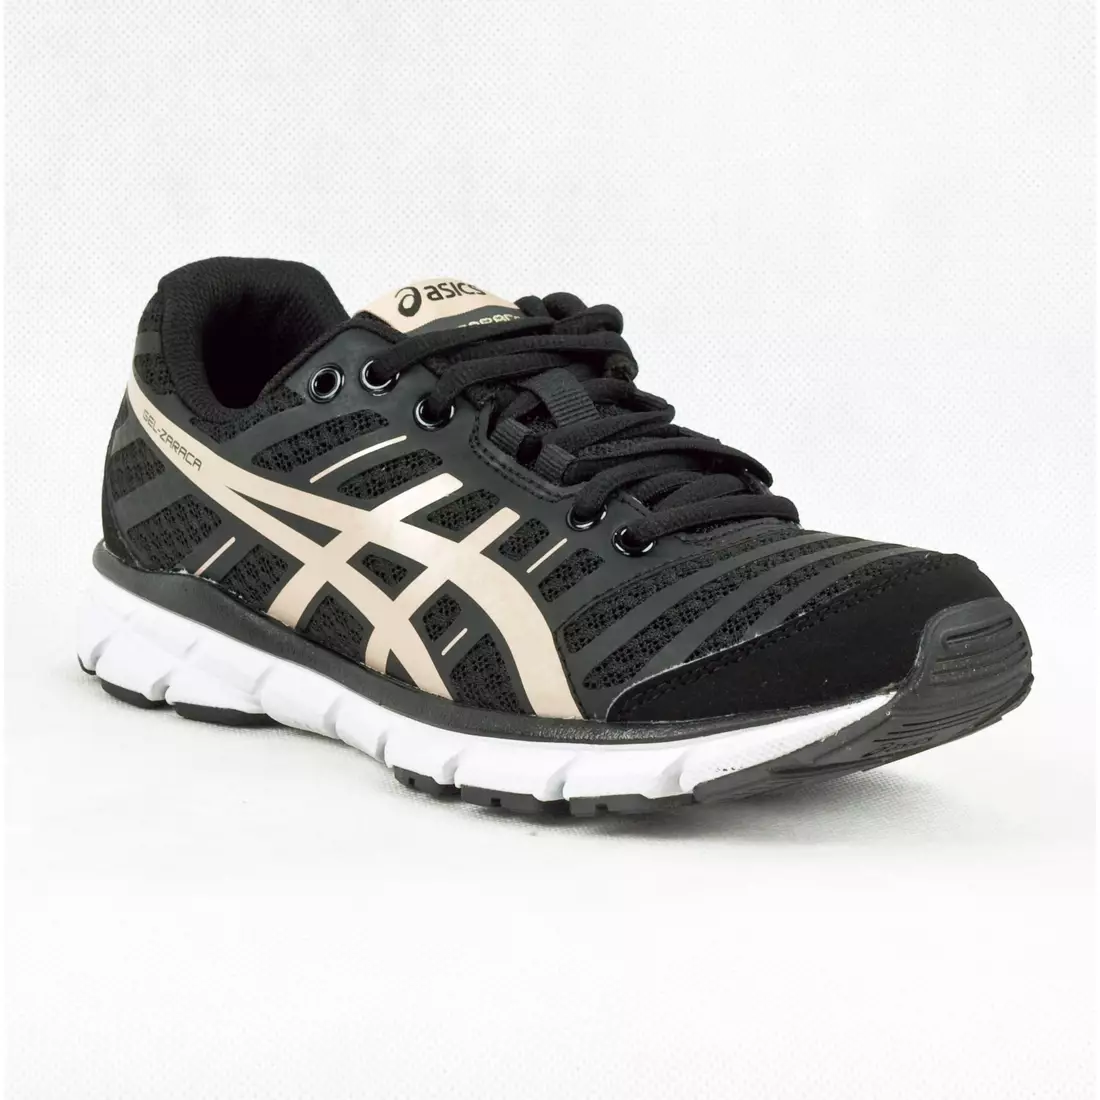 ASICS GEL ZARACA 2 - women's running shoes 9094, color: Black and gold